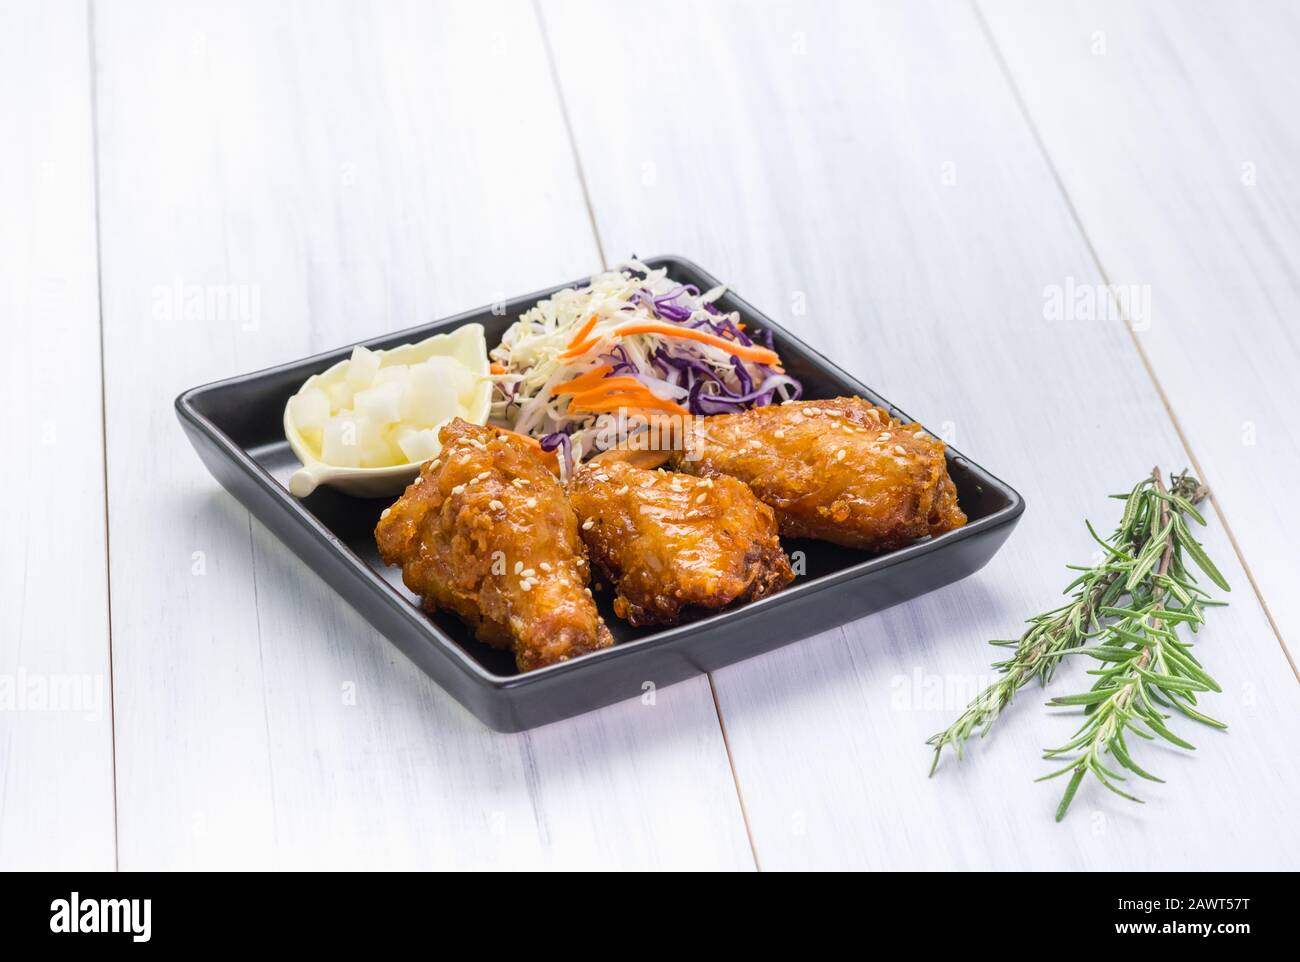 fried chicken wing and salad on tablecloth on white wood table in kitchen,food menu appetizer. Stock Photo